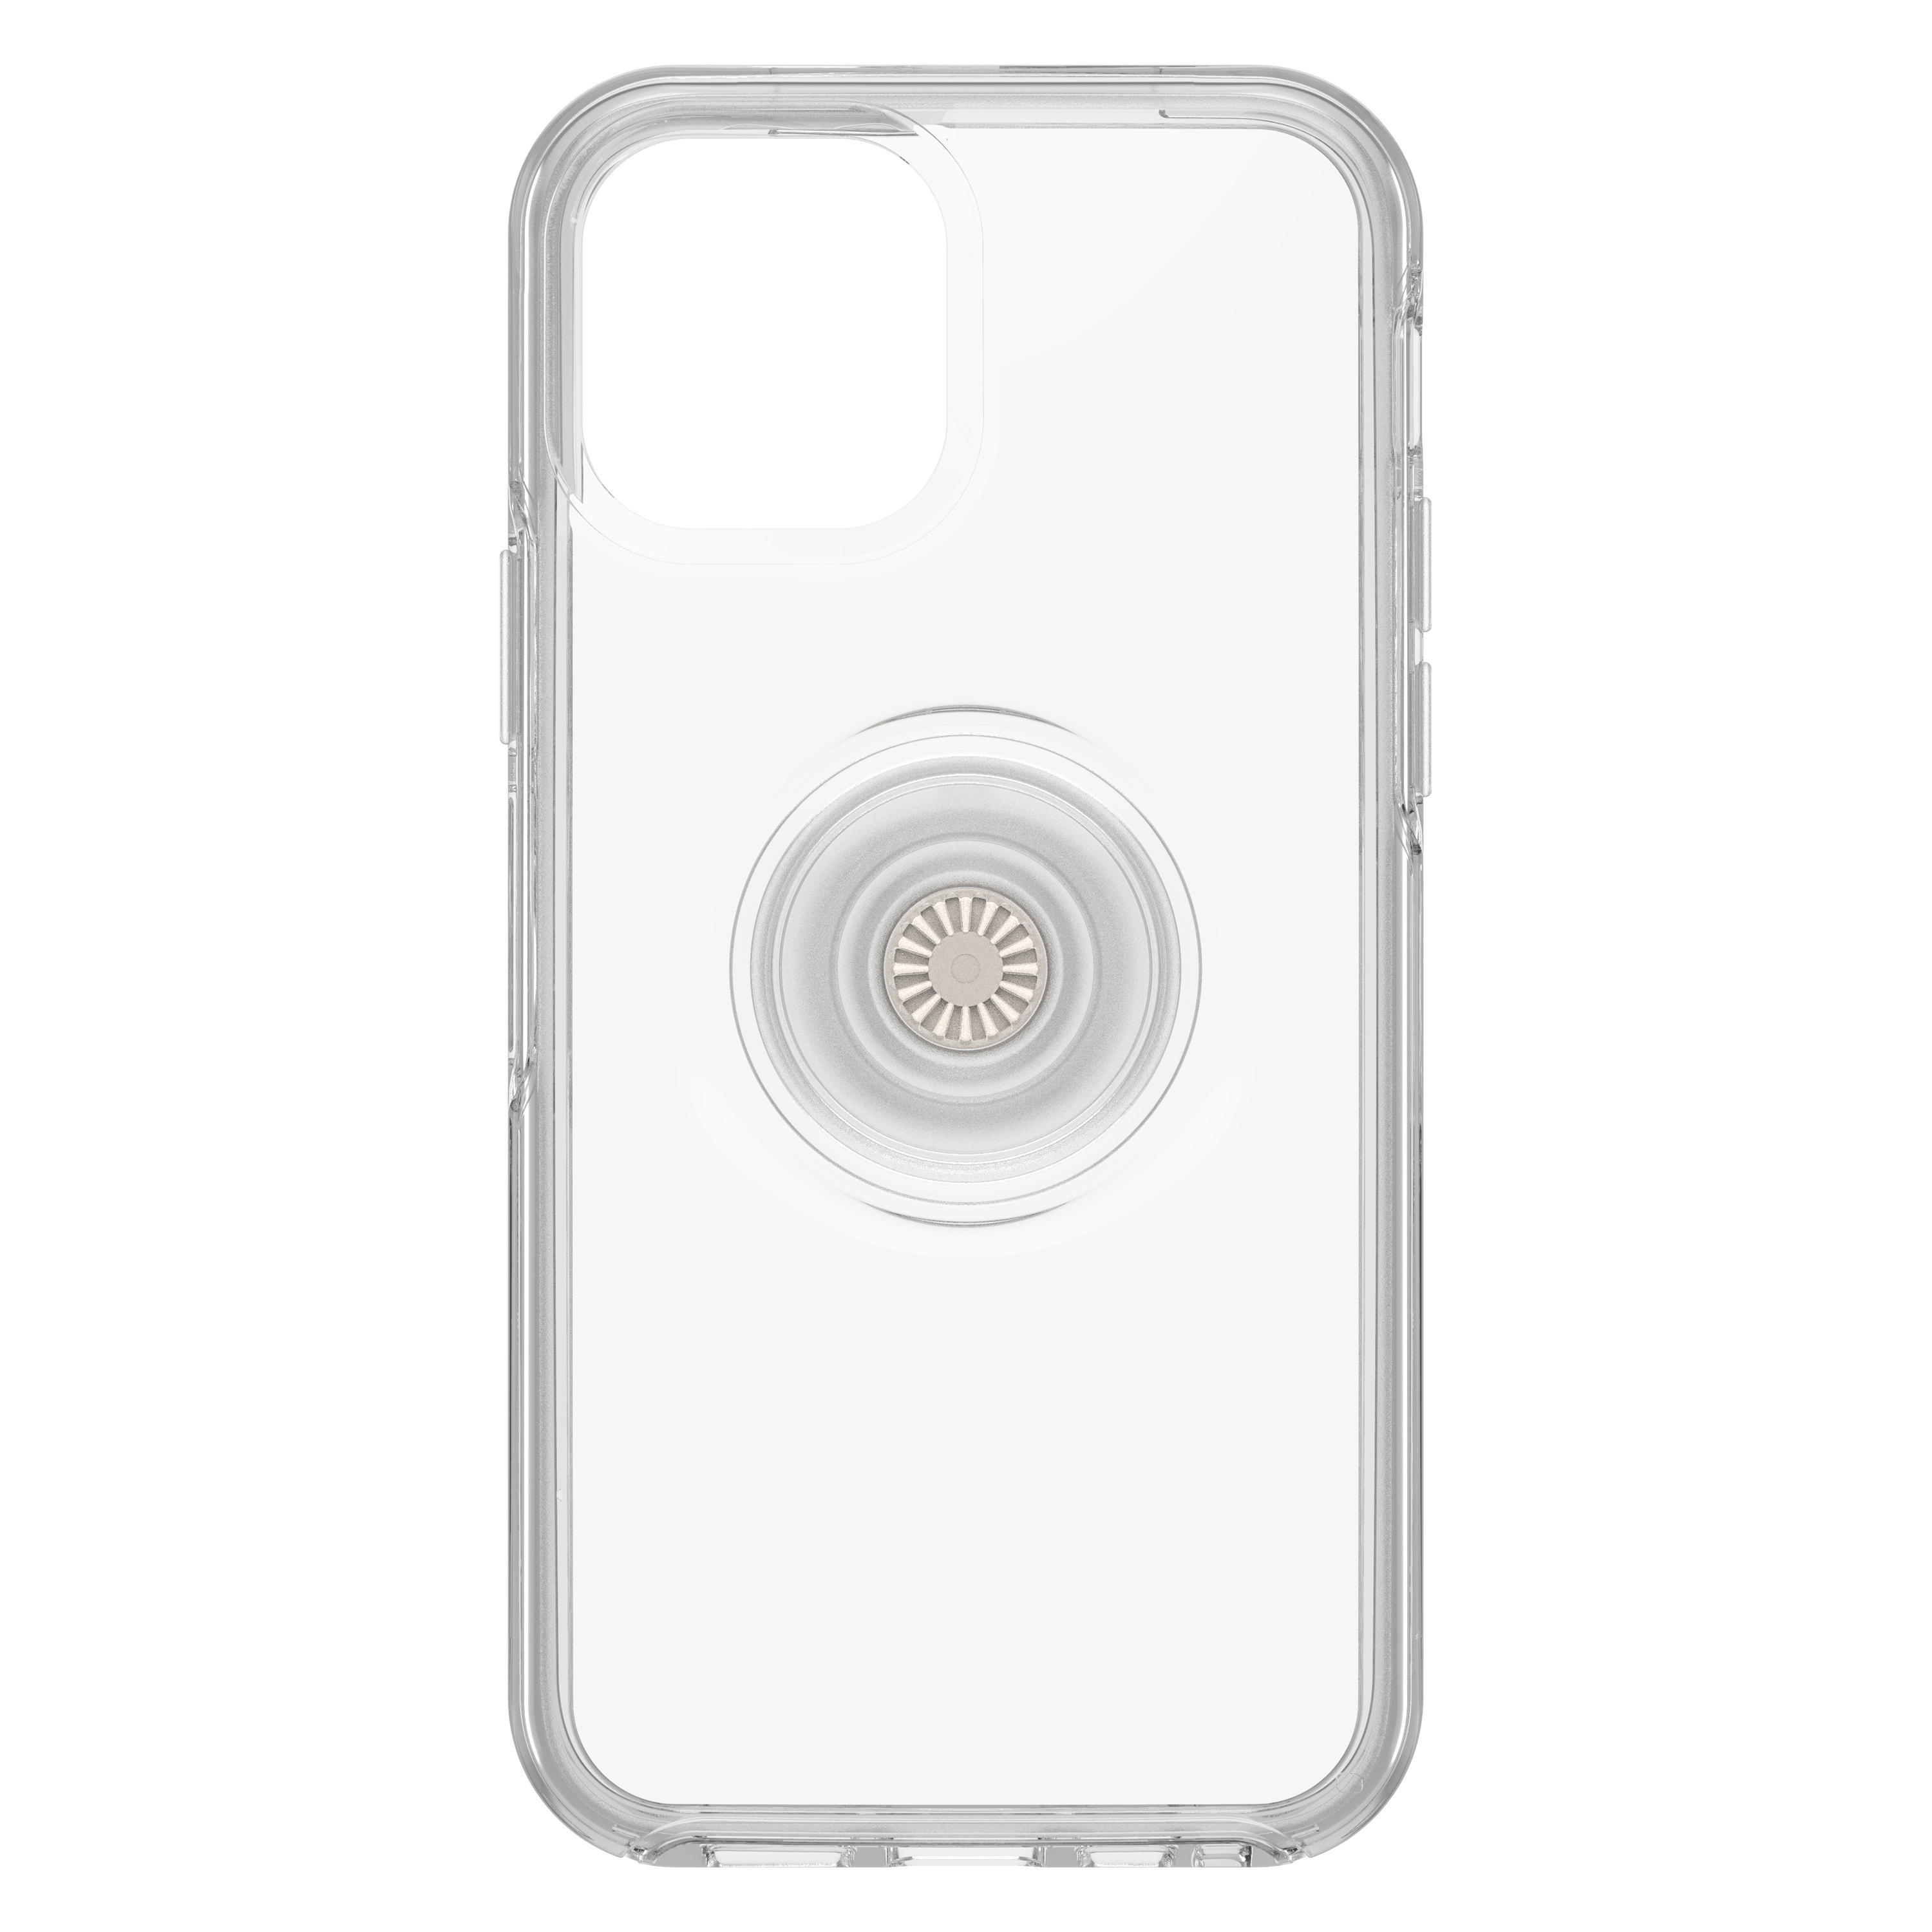 Symmetry Backcover, iPhone + Pop OTTERBOX 12, Otter Transparent 12 Pro, iPhone Apple, Series,